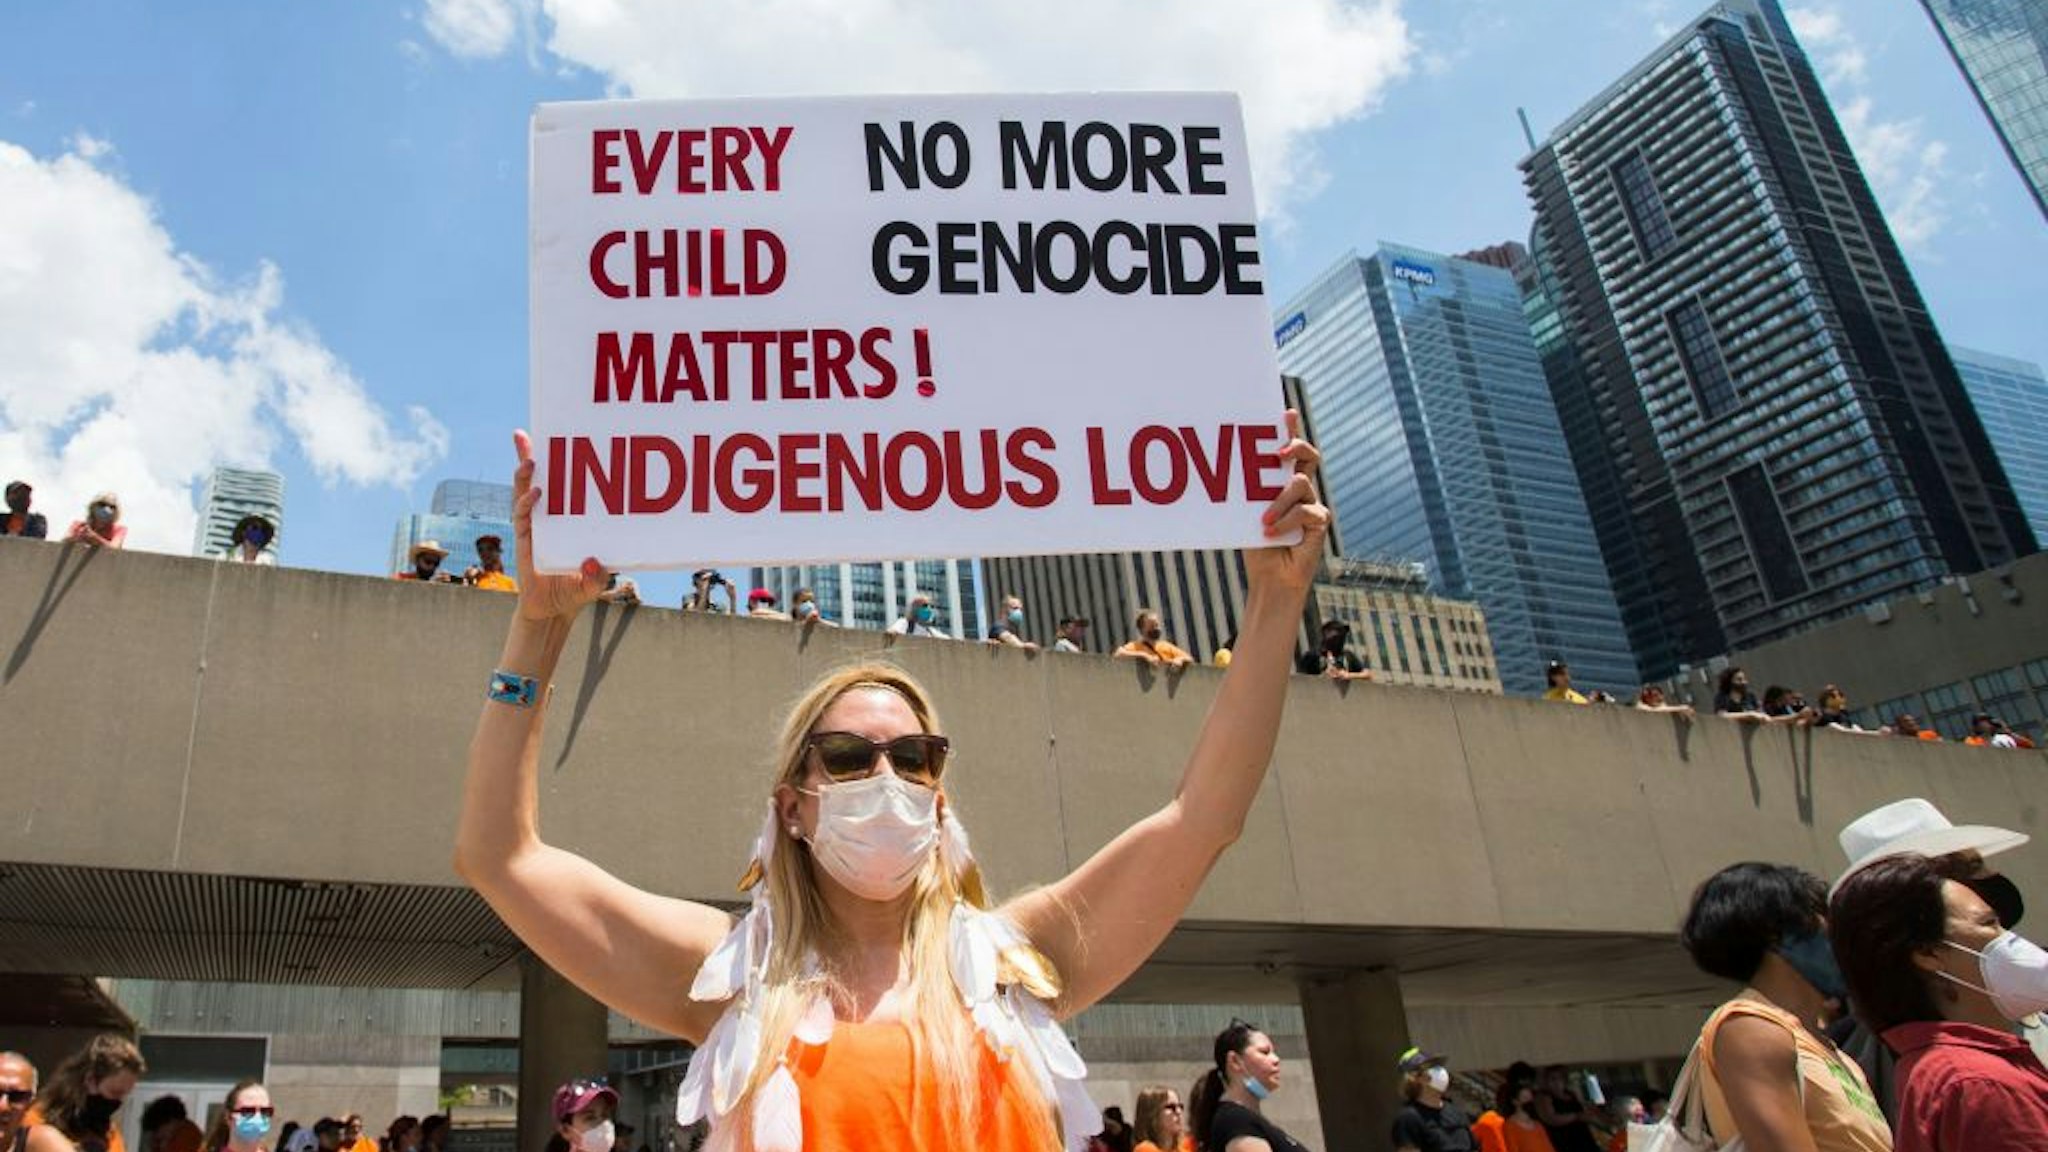 A woman holds a placard during a rally in Toronto, Canada, on July 1, 2021. Hundreds of people gathered here on Thursday to pay tribute to indigenous children whose bodies were found in mass graves near former indigenous residential schools in Canada.